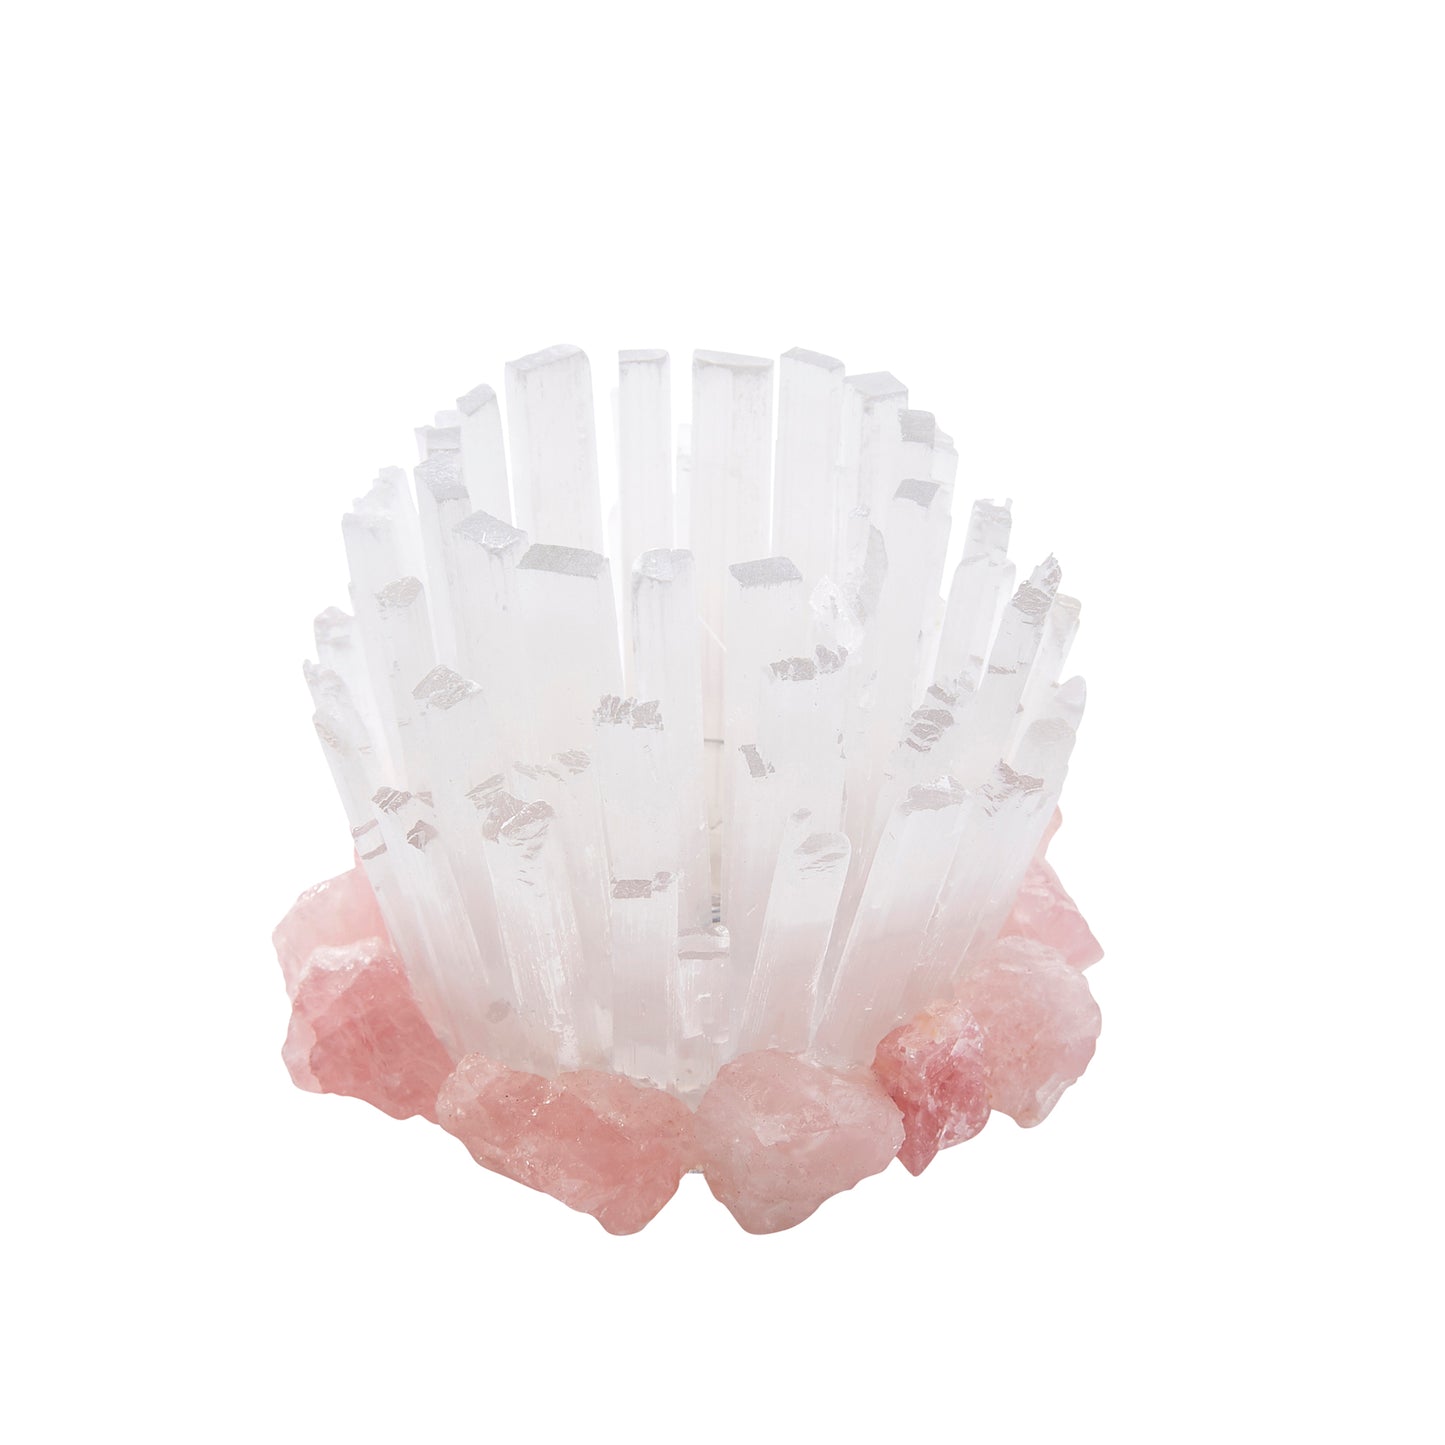 WHITE/PINK SELENITE CANDLE HOLDER